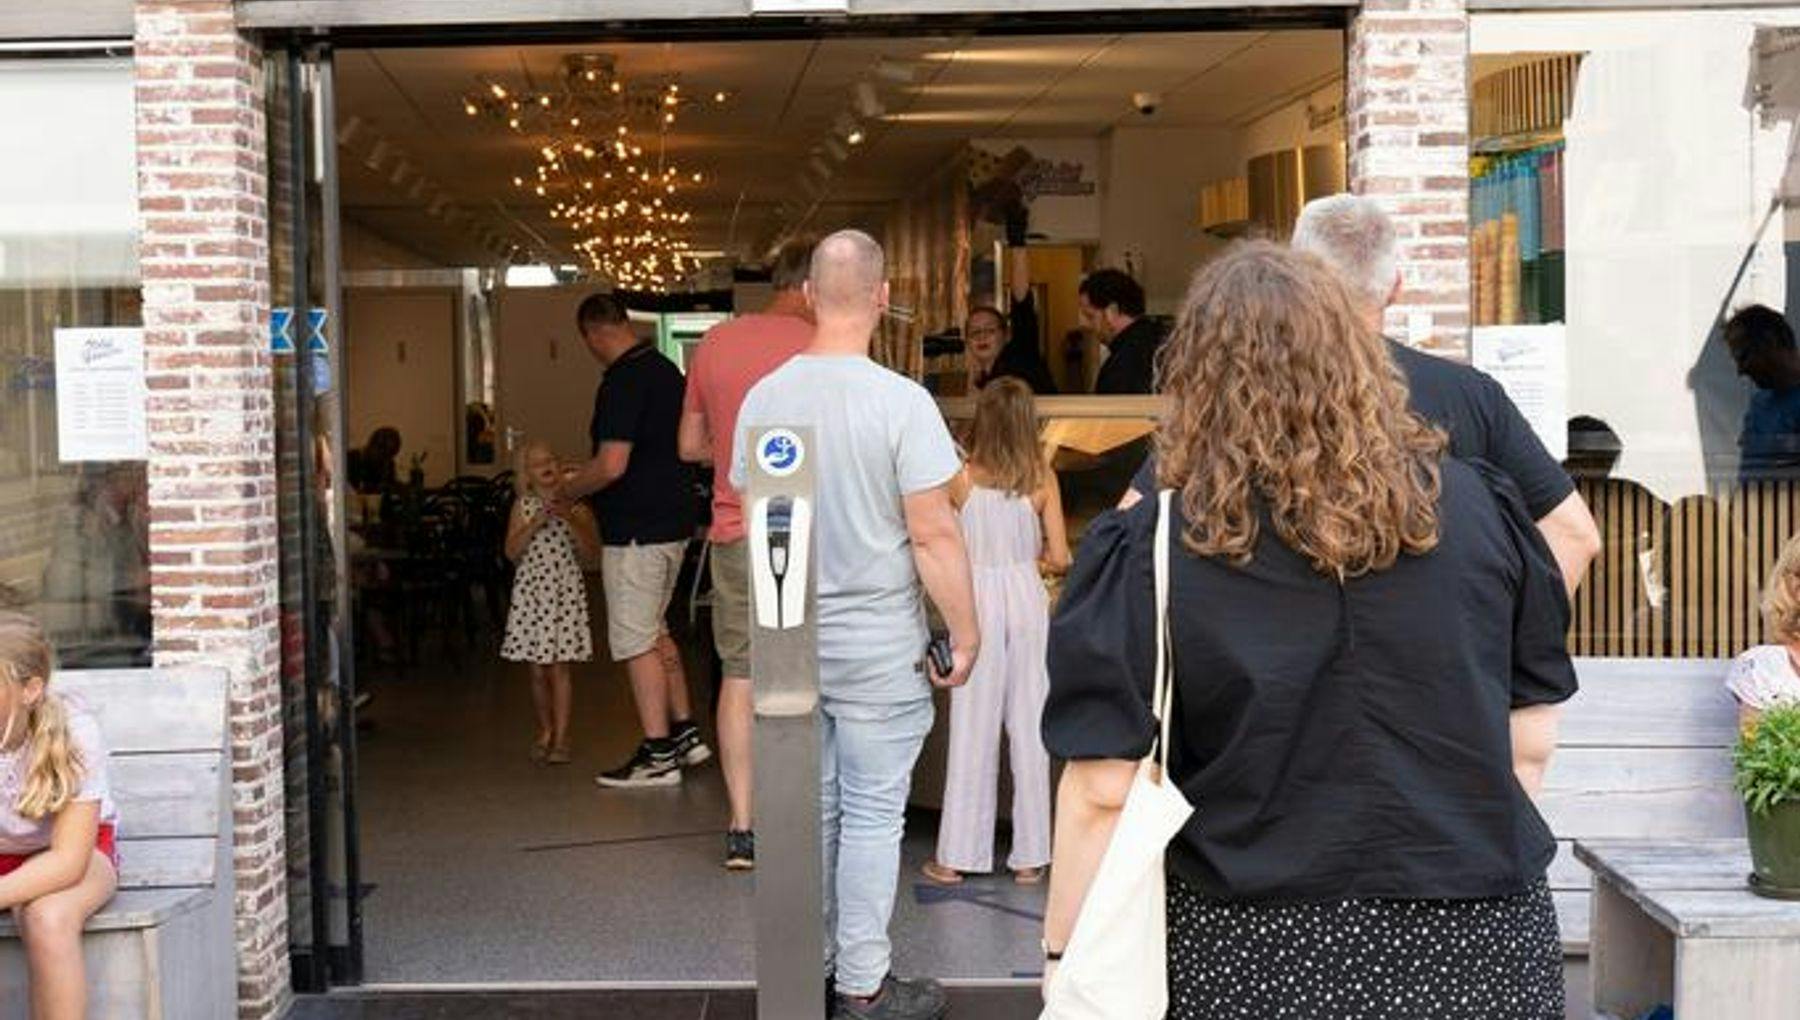 People waiting in line for Ice cream at Nelis' IJssalon @ Weesp